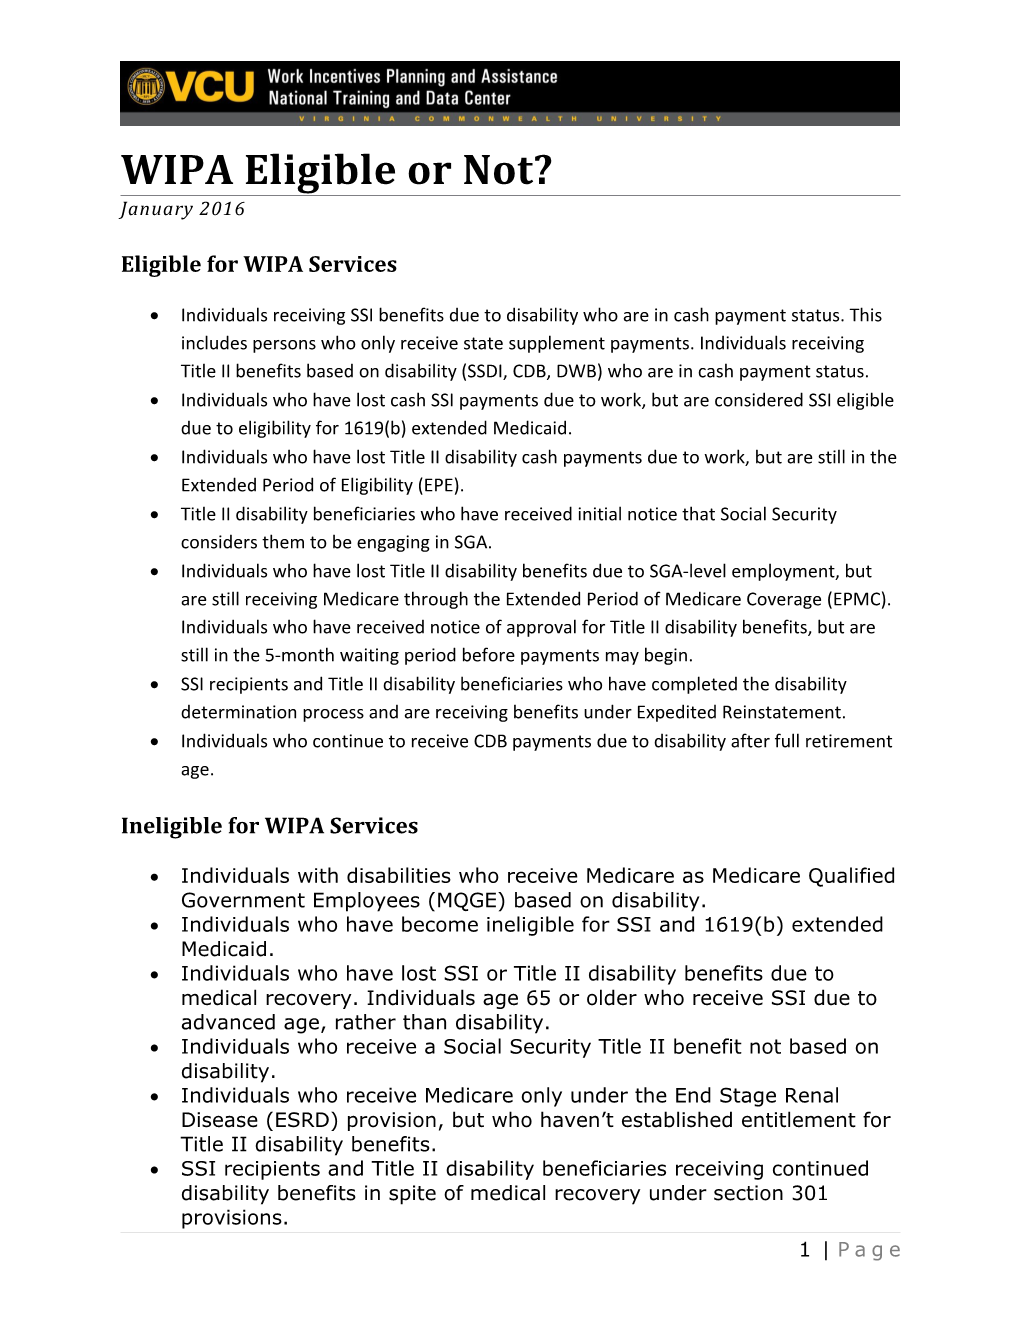 WIPA Eligible Or Not?